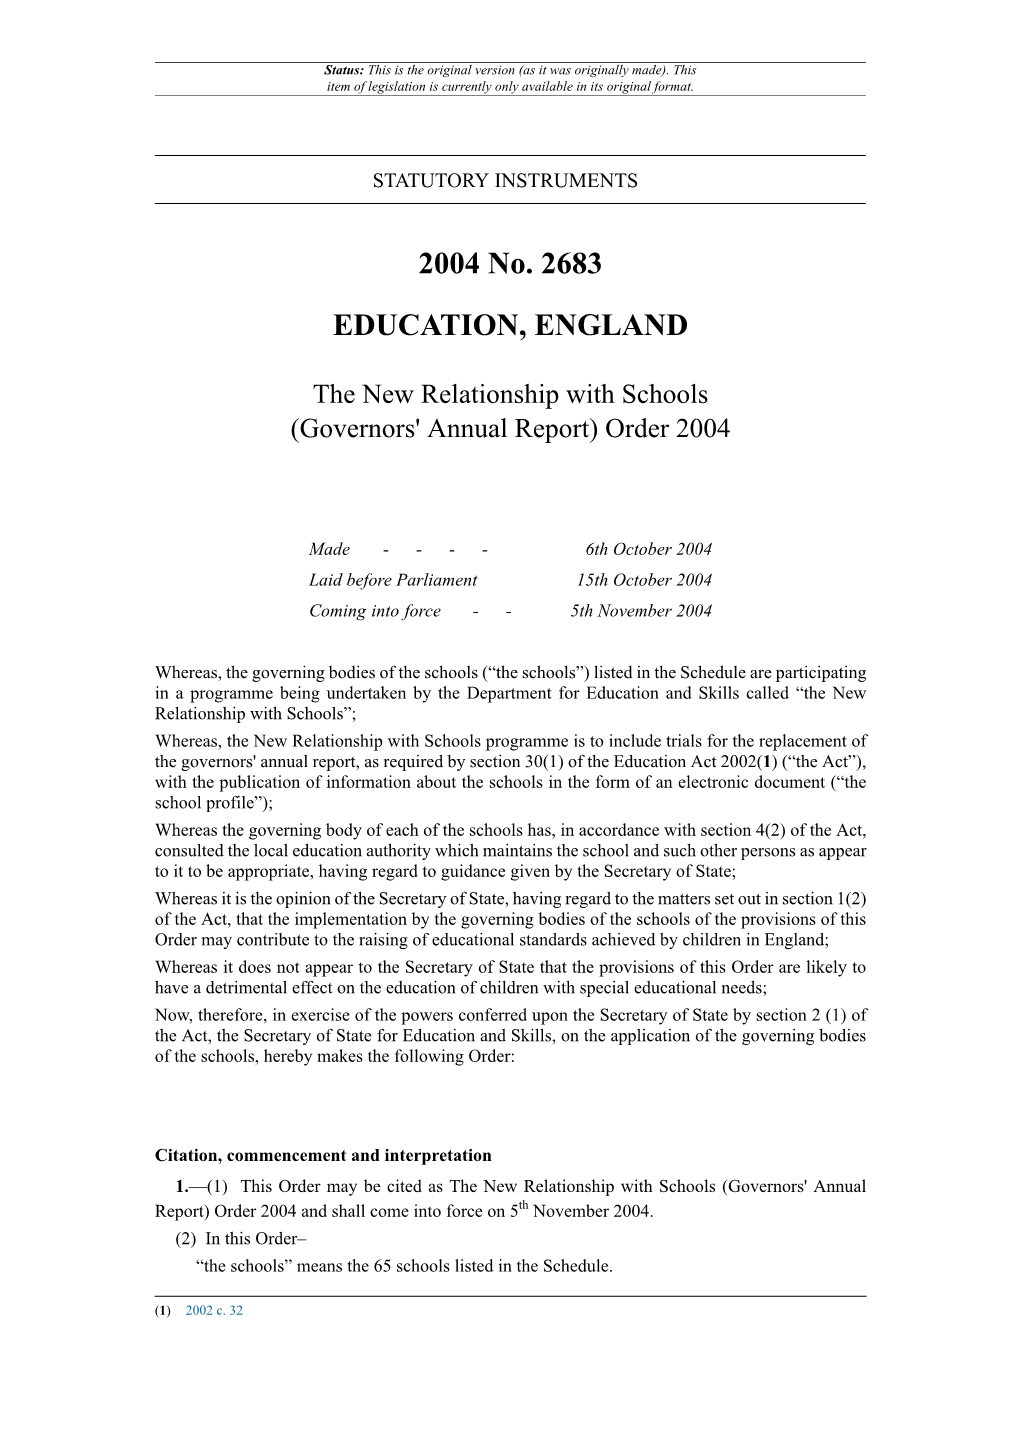 The New Relationship with Schools (Governors' Annual Report) Order 2004